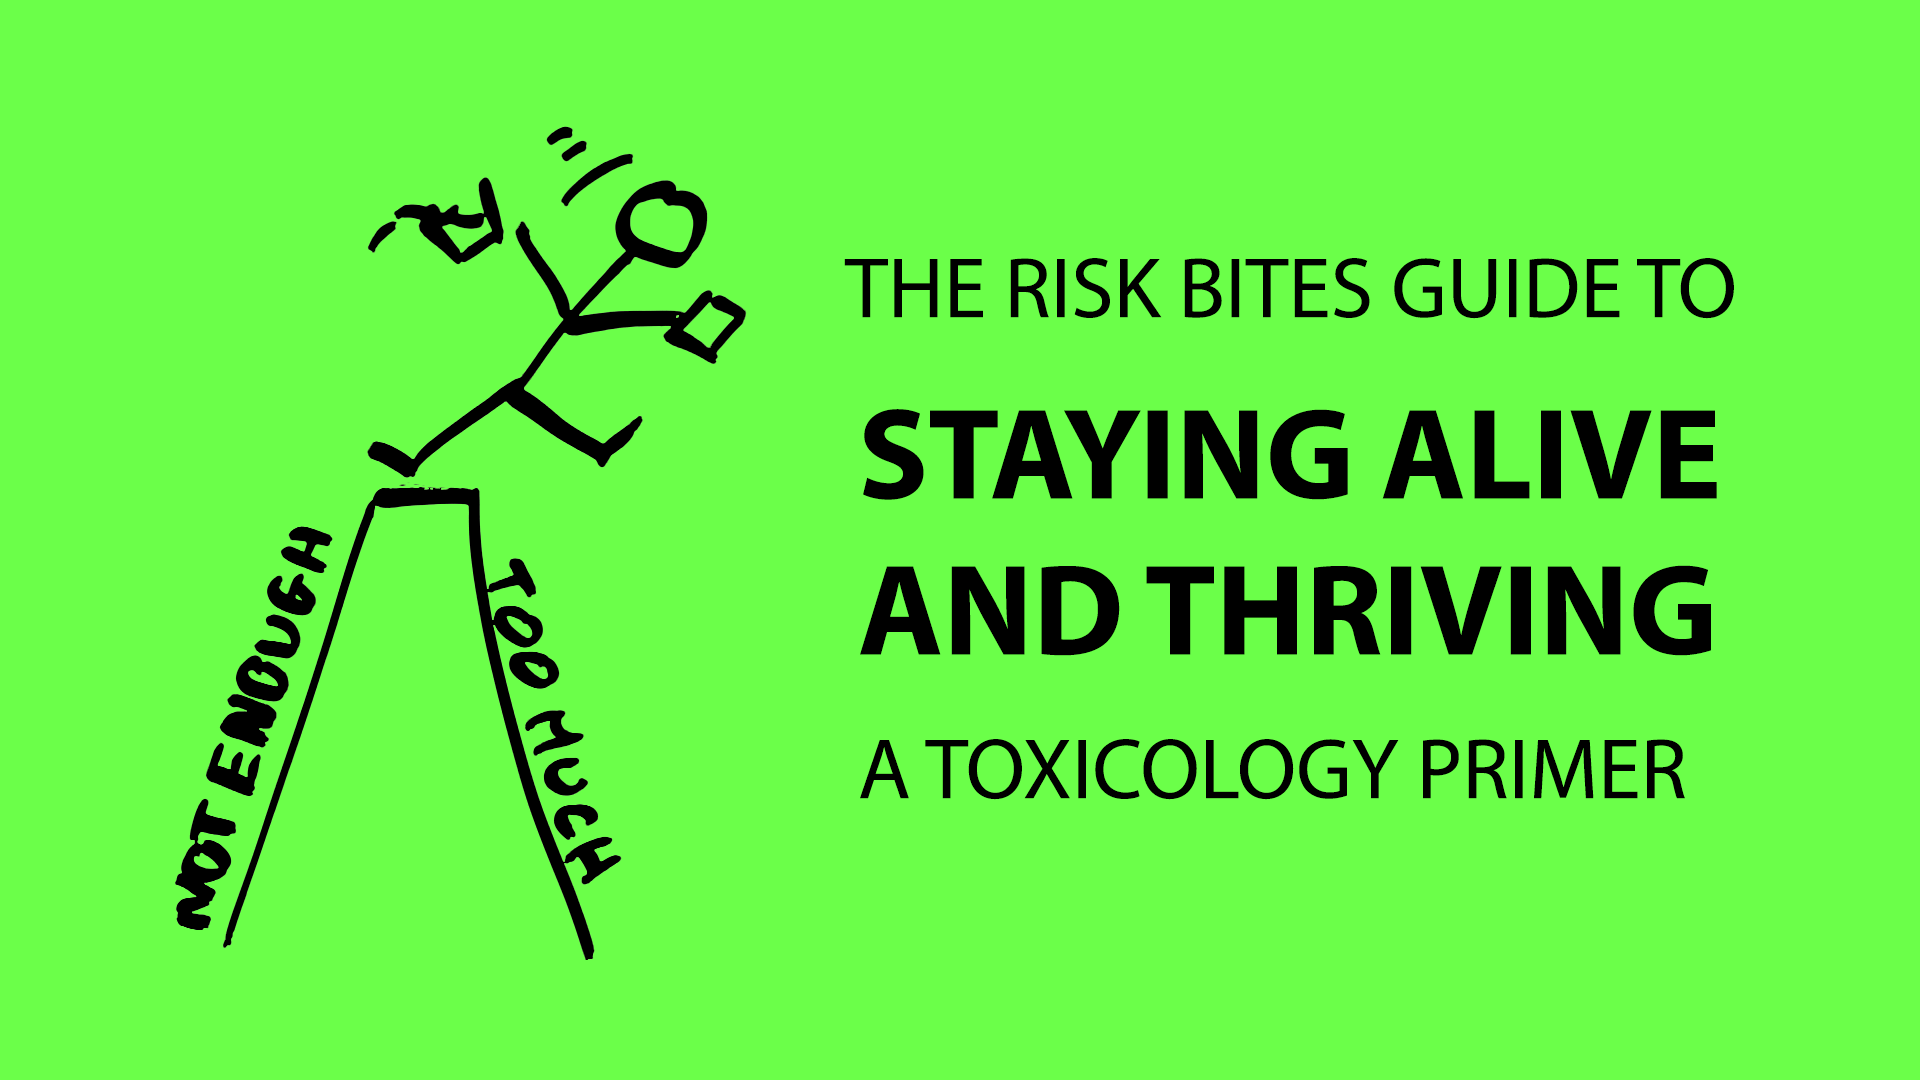 Toxicologists are Freakin’ Awesome!